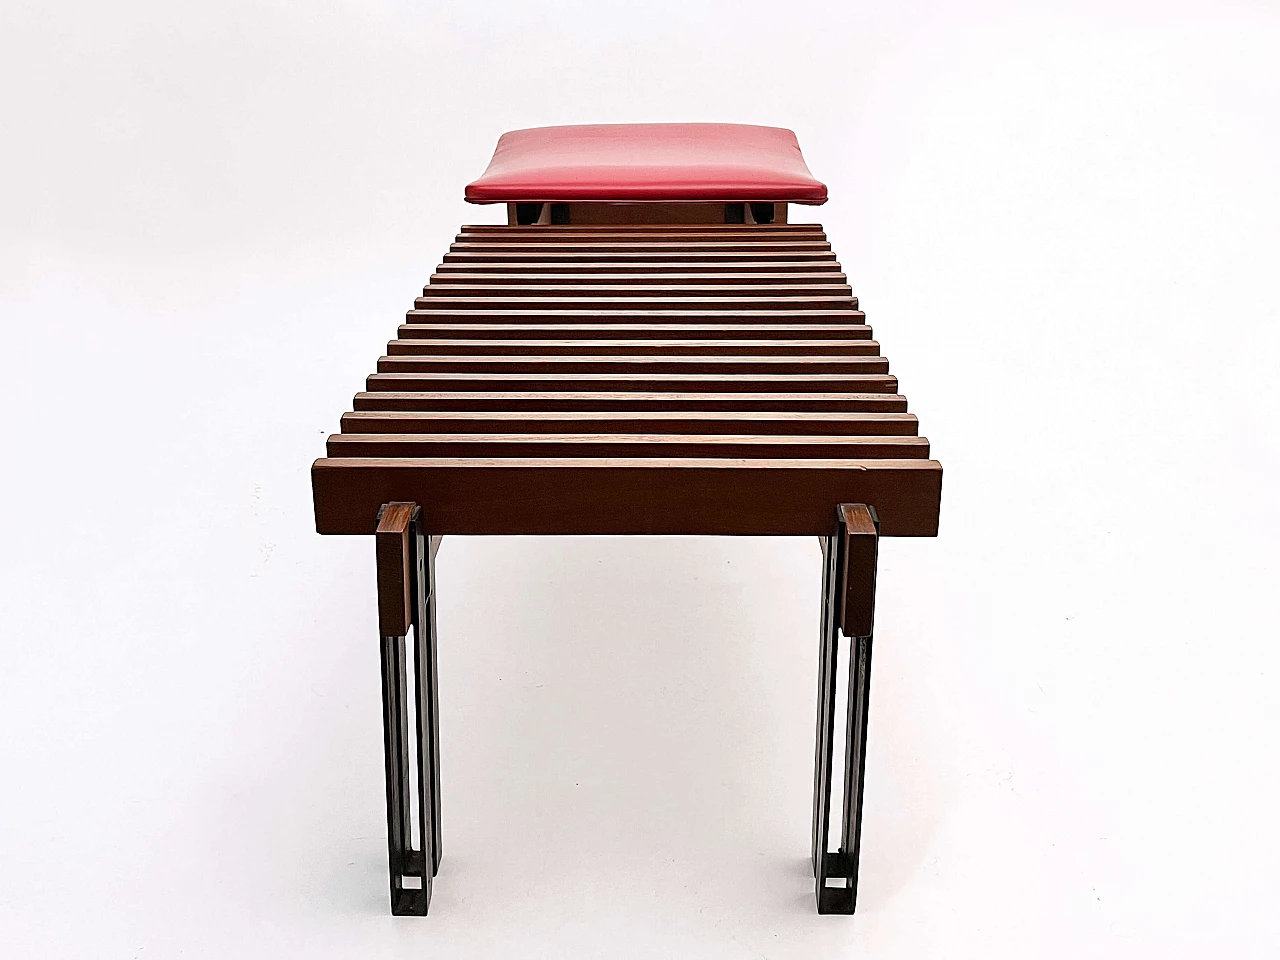 Teak and steel bench with skai seat by Inge and Luciano Rubino for APEC, 1960s 7